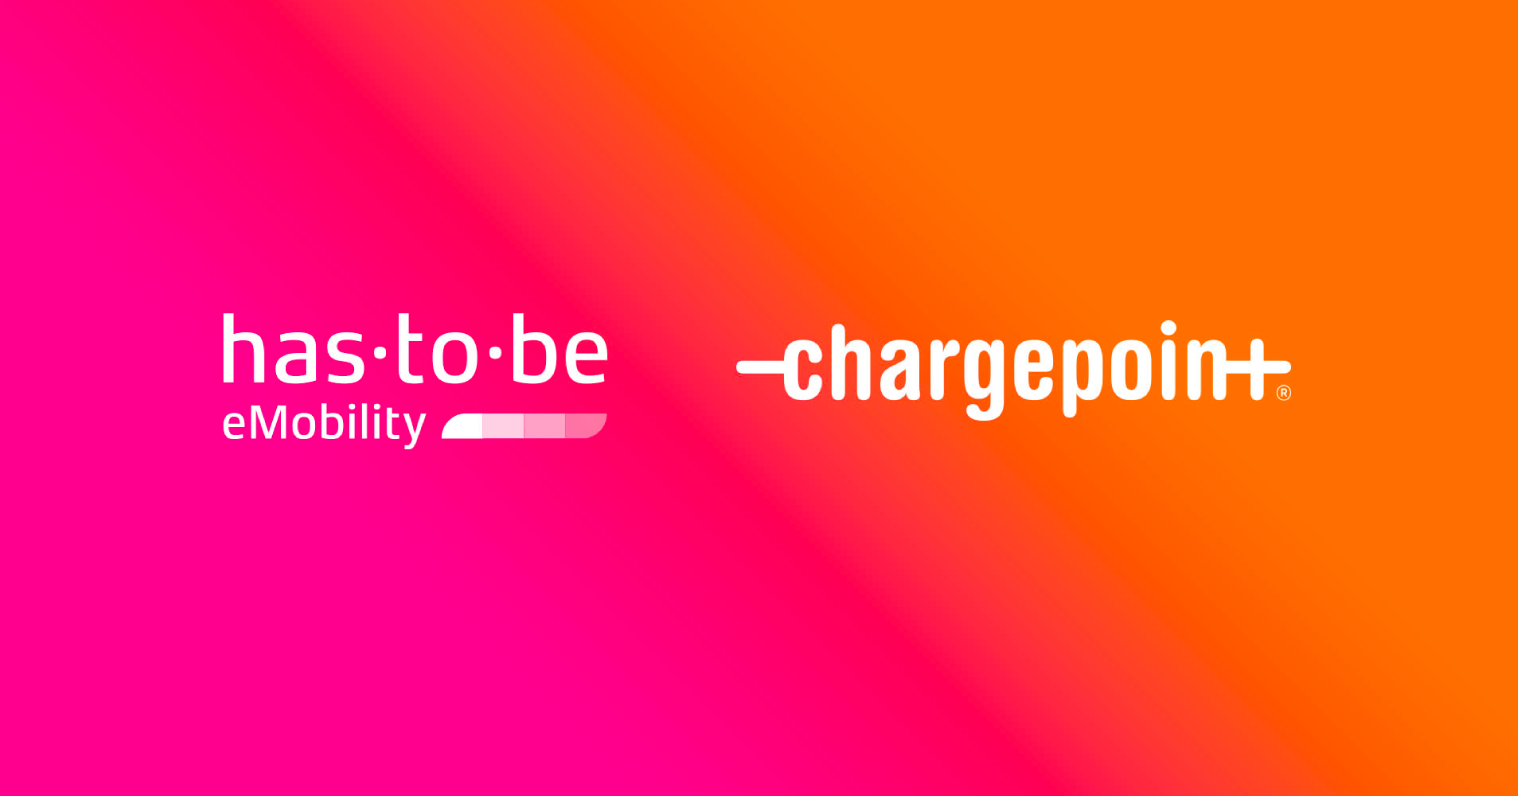 has·to·be and ChargePoint